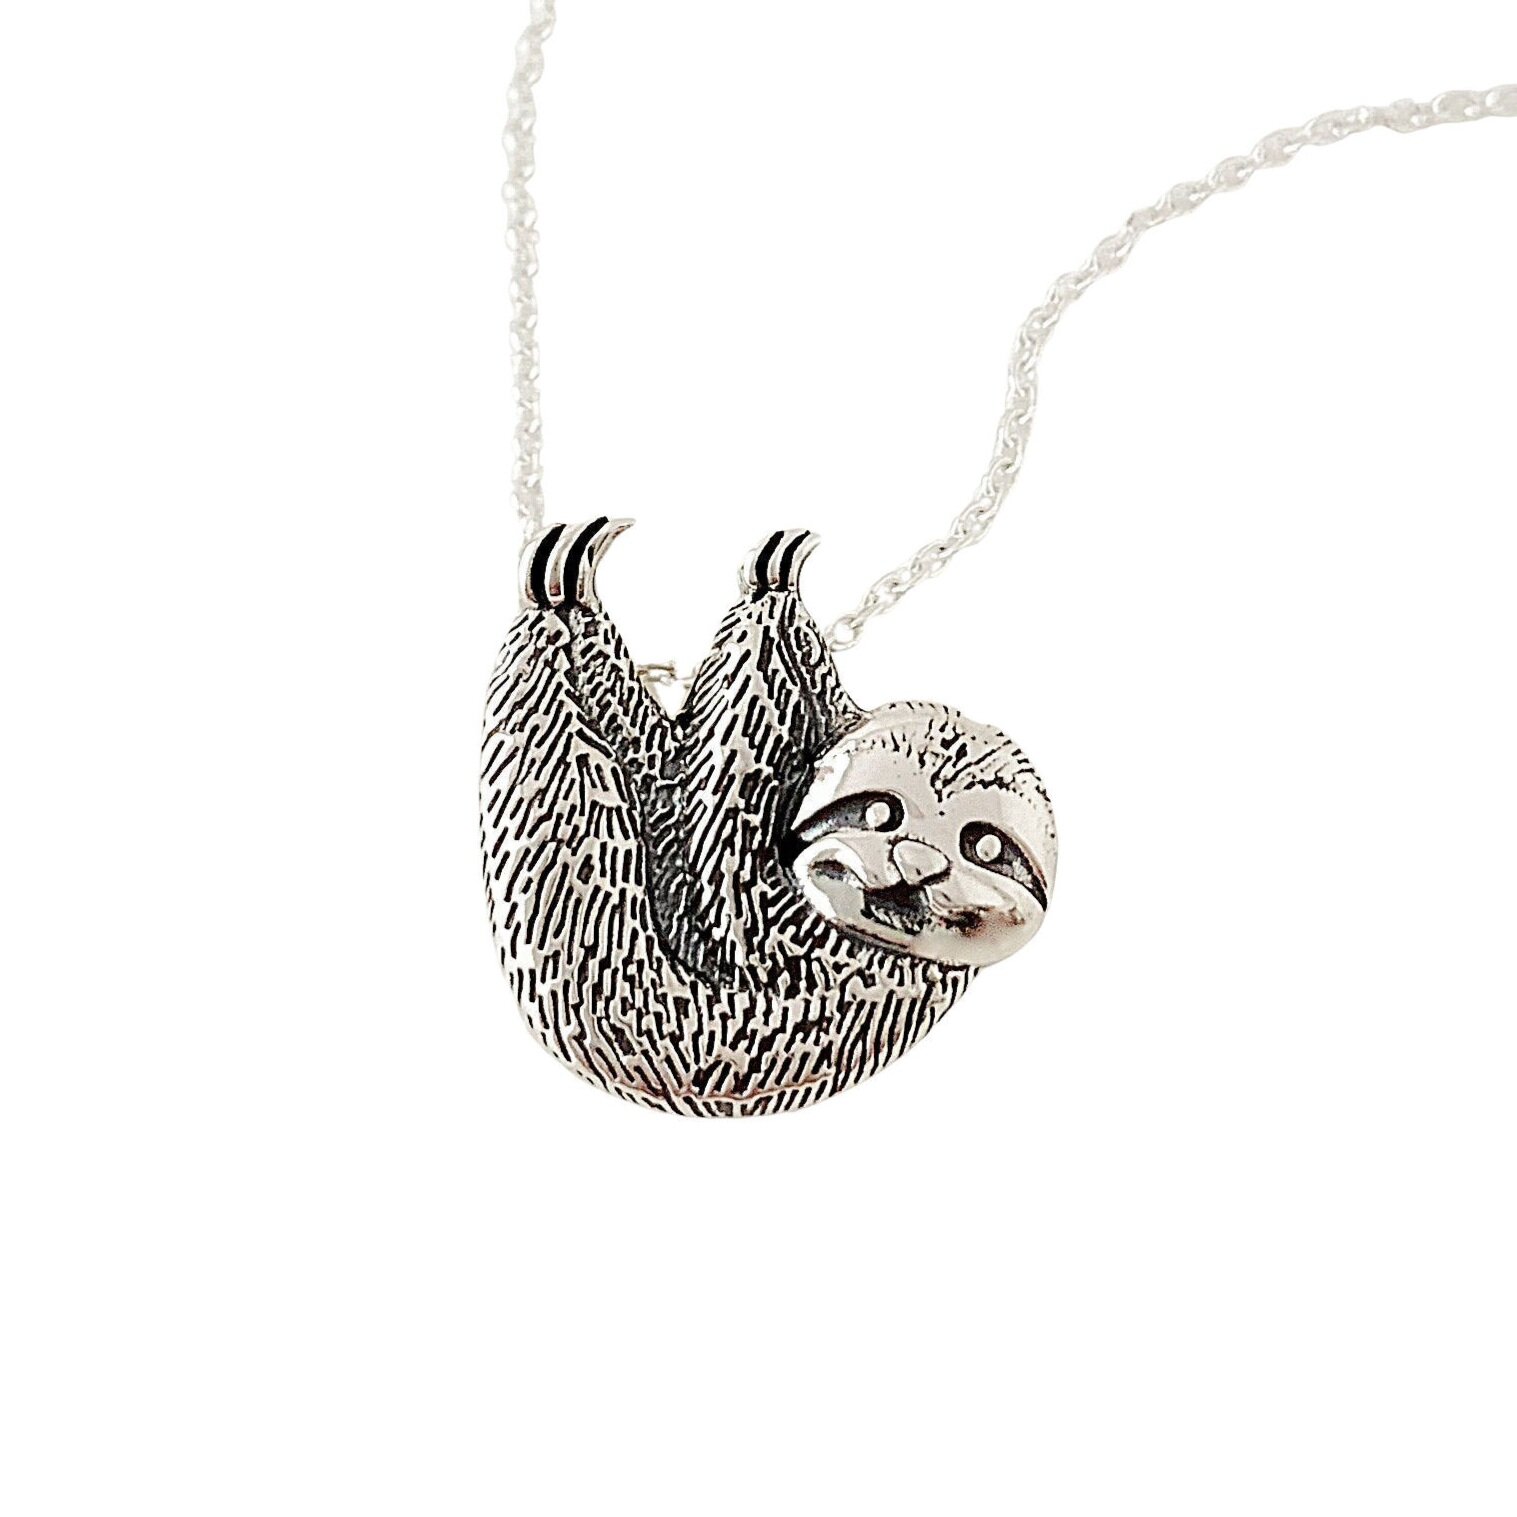 YAFEINI Sloth Gifts Sterling Silver Sloth Necklace Heart Animal Pendant for Women Jewelry